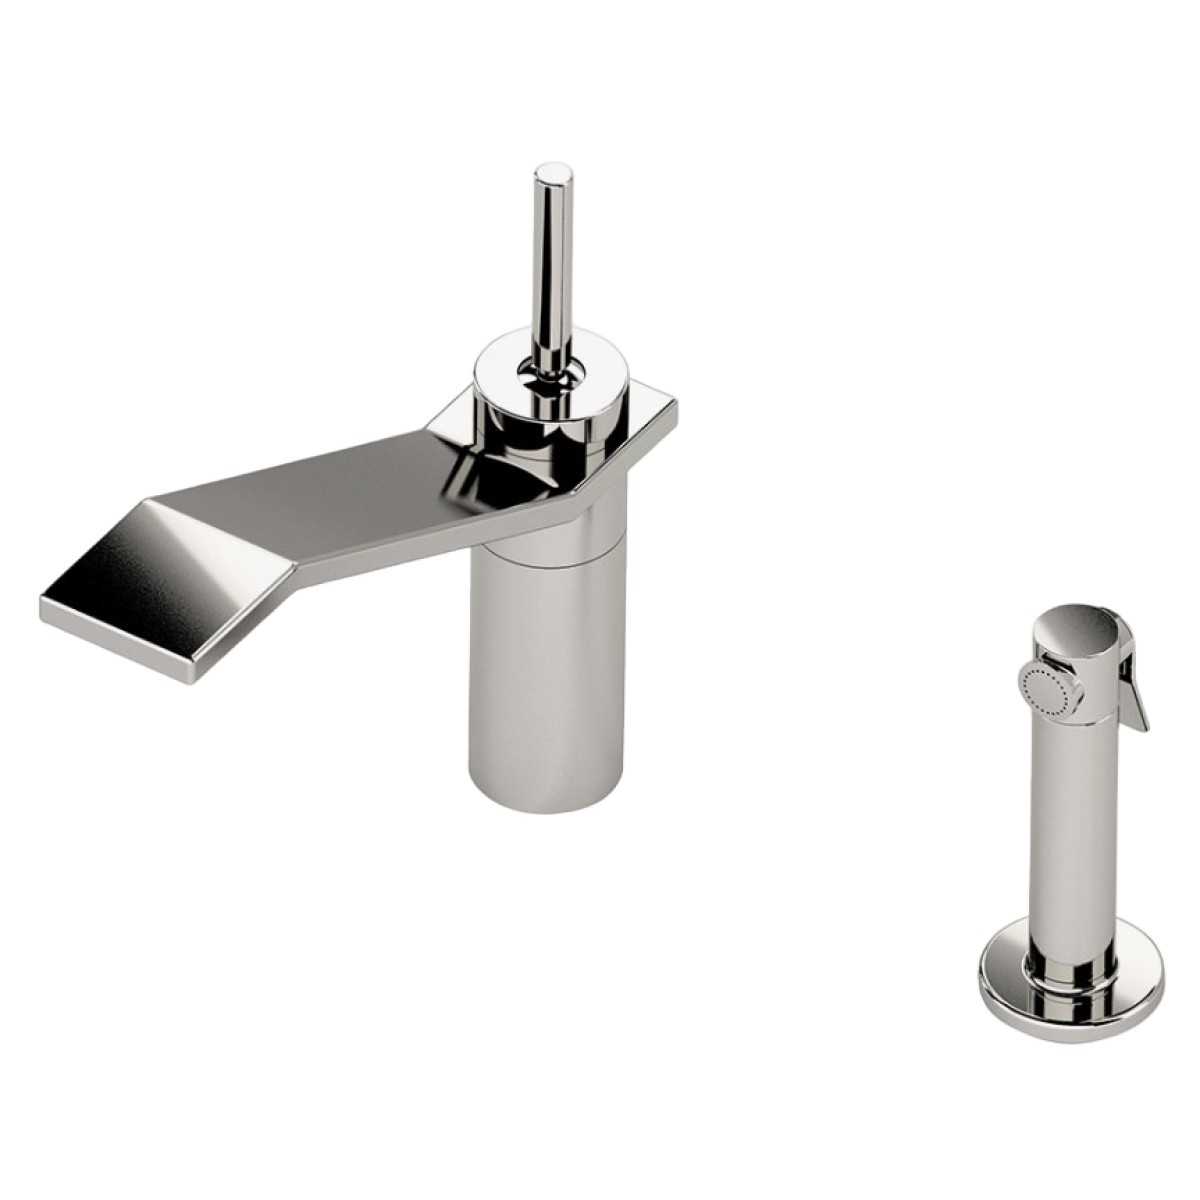 Formwork One Hole High Profile Kitchen Faucet, Metal Joystick Handle and Spray